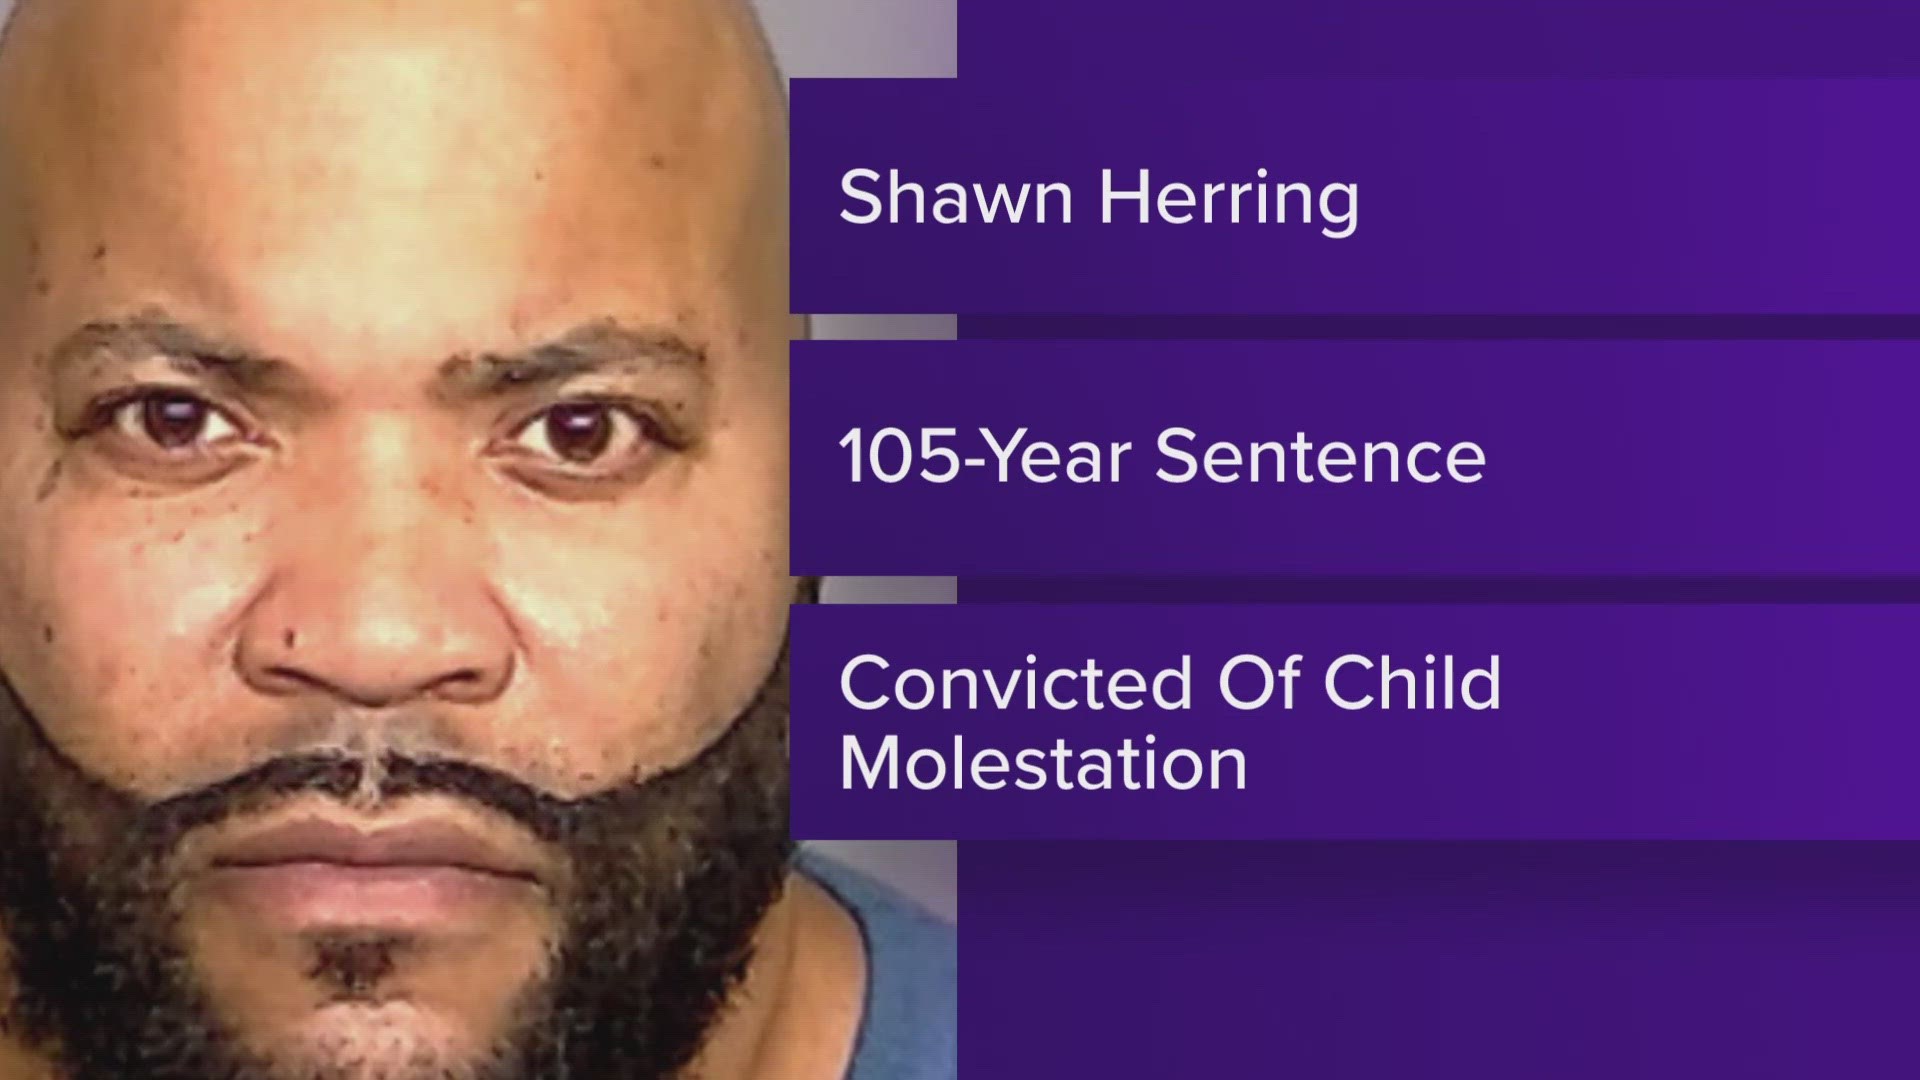 Shawn Herring admitted he had intercourse with the girl at least twice. He assaulted her from the time she was 10 to the time she was 15.